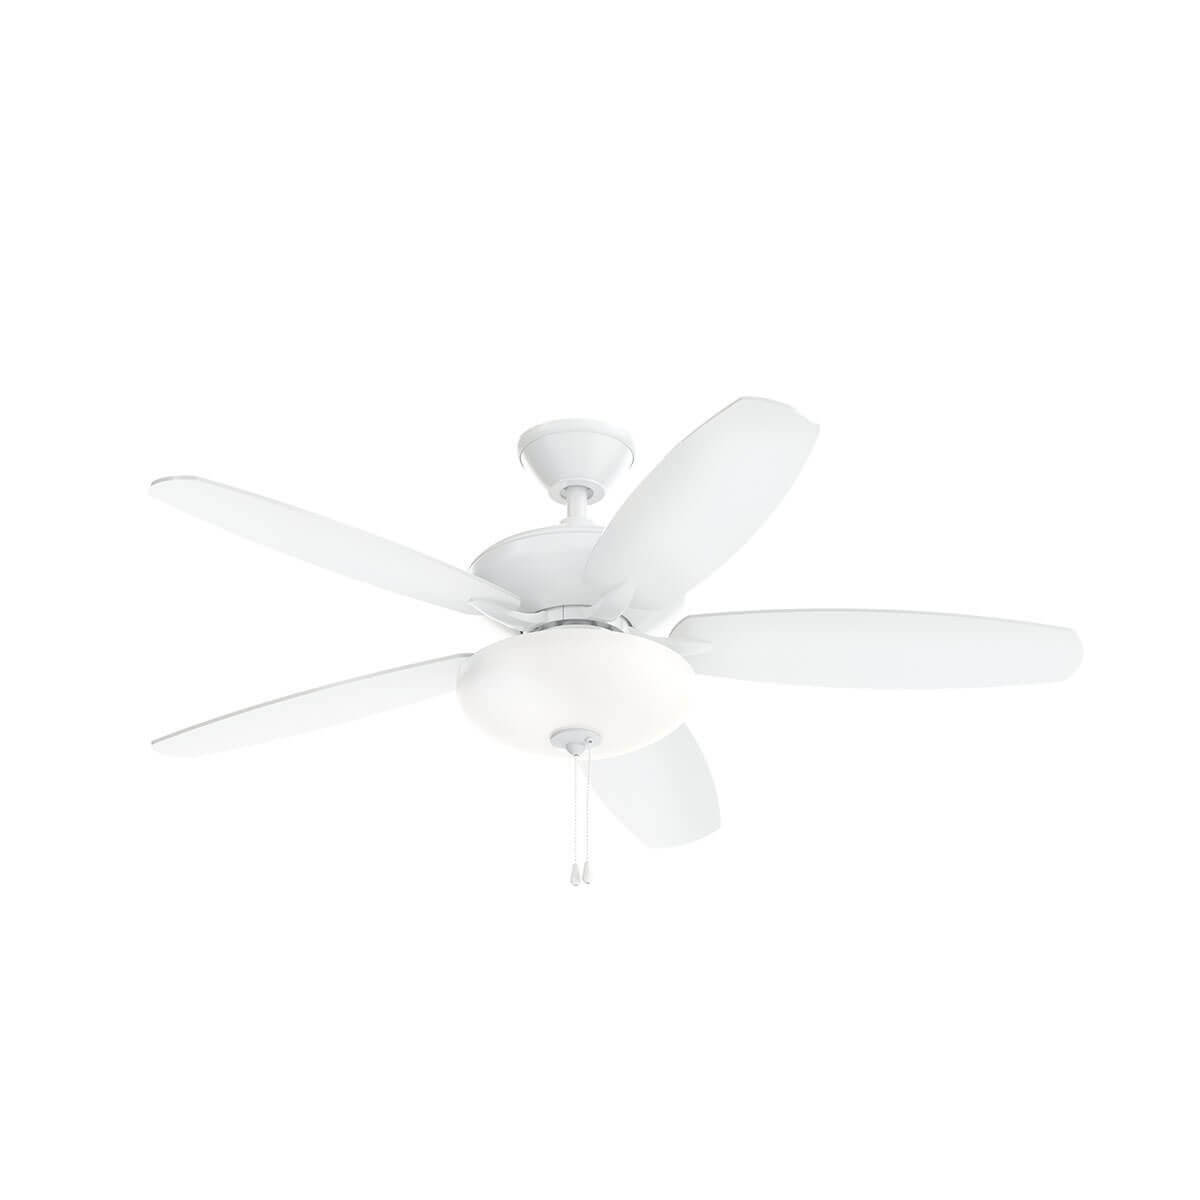 Kichler 330161MWH Renew 52 inch 5 Blade Pull Chain LED Ceiling Fan in Matte White